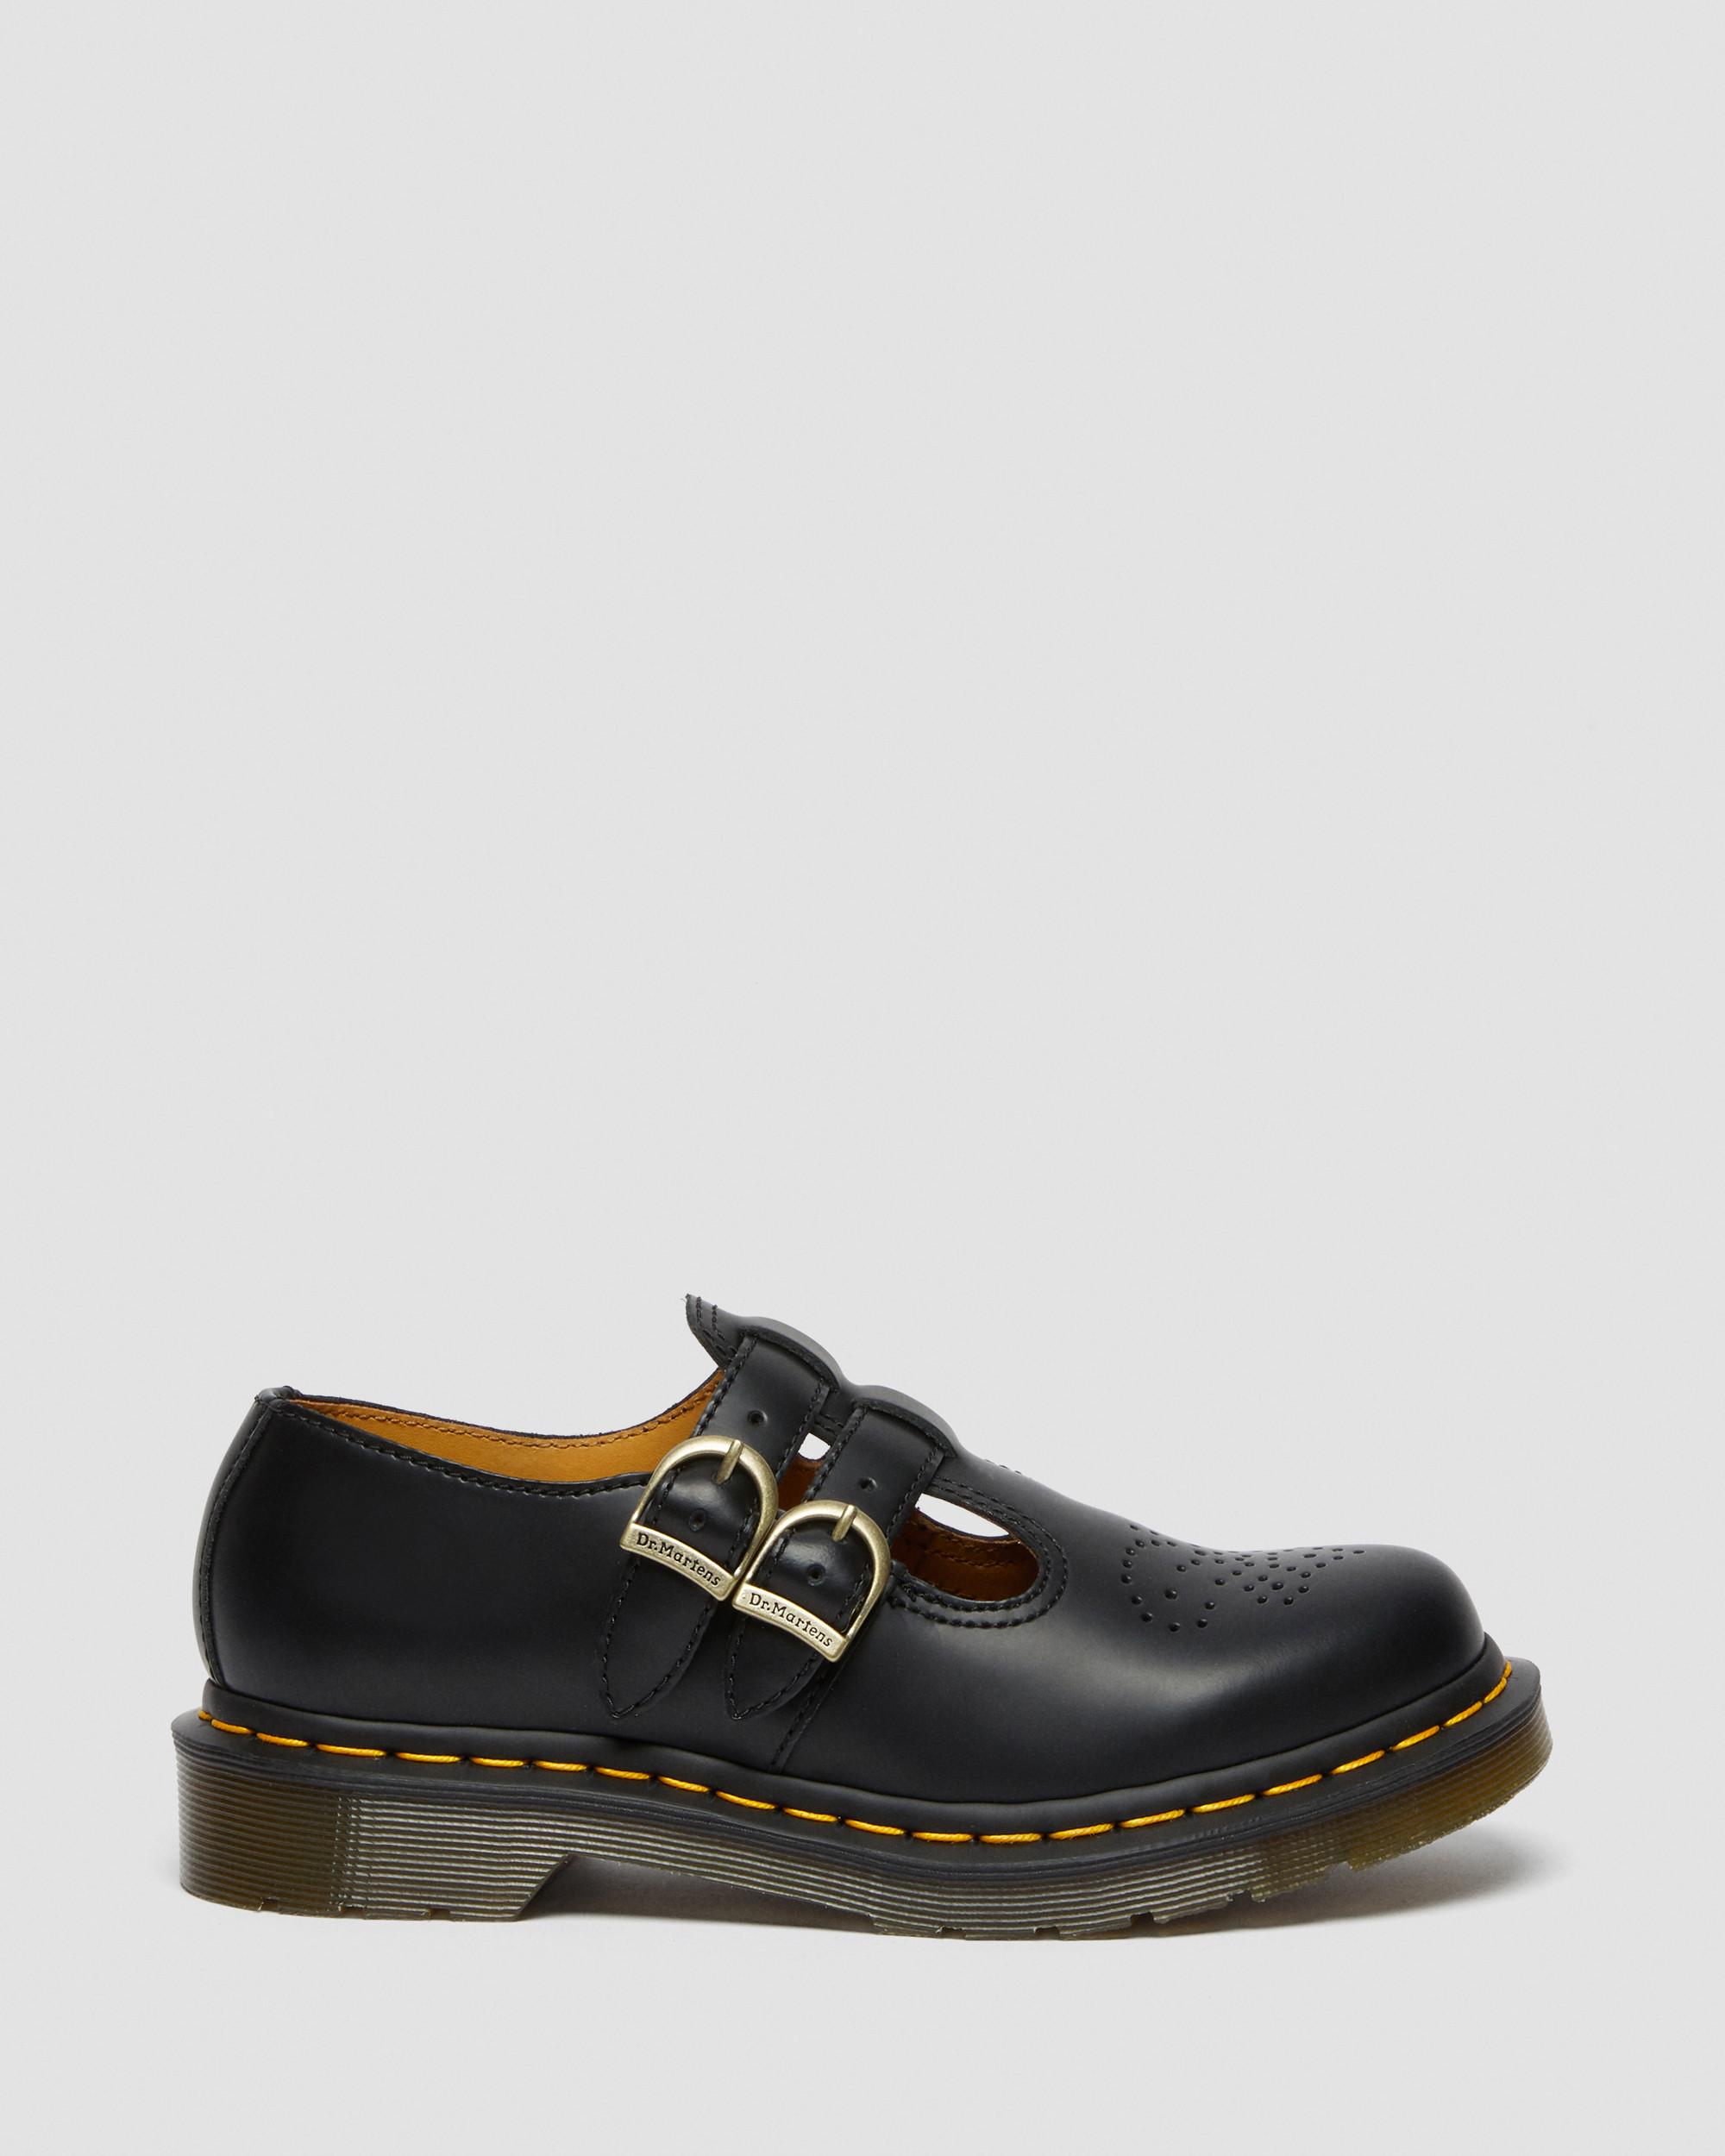 8065 Smooth Leather Mary Jane Shoes in Black | Dr. Martens